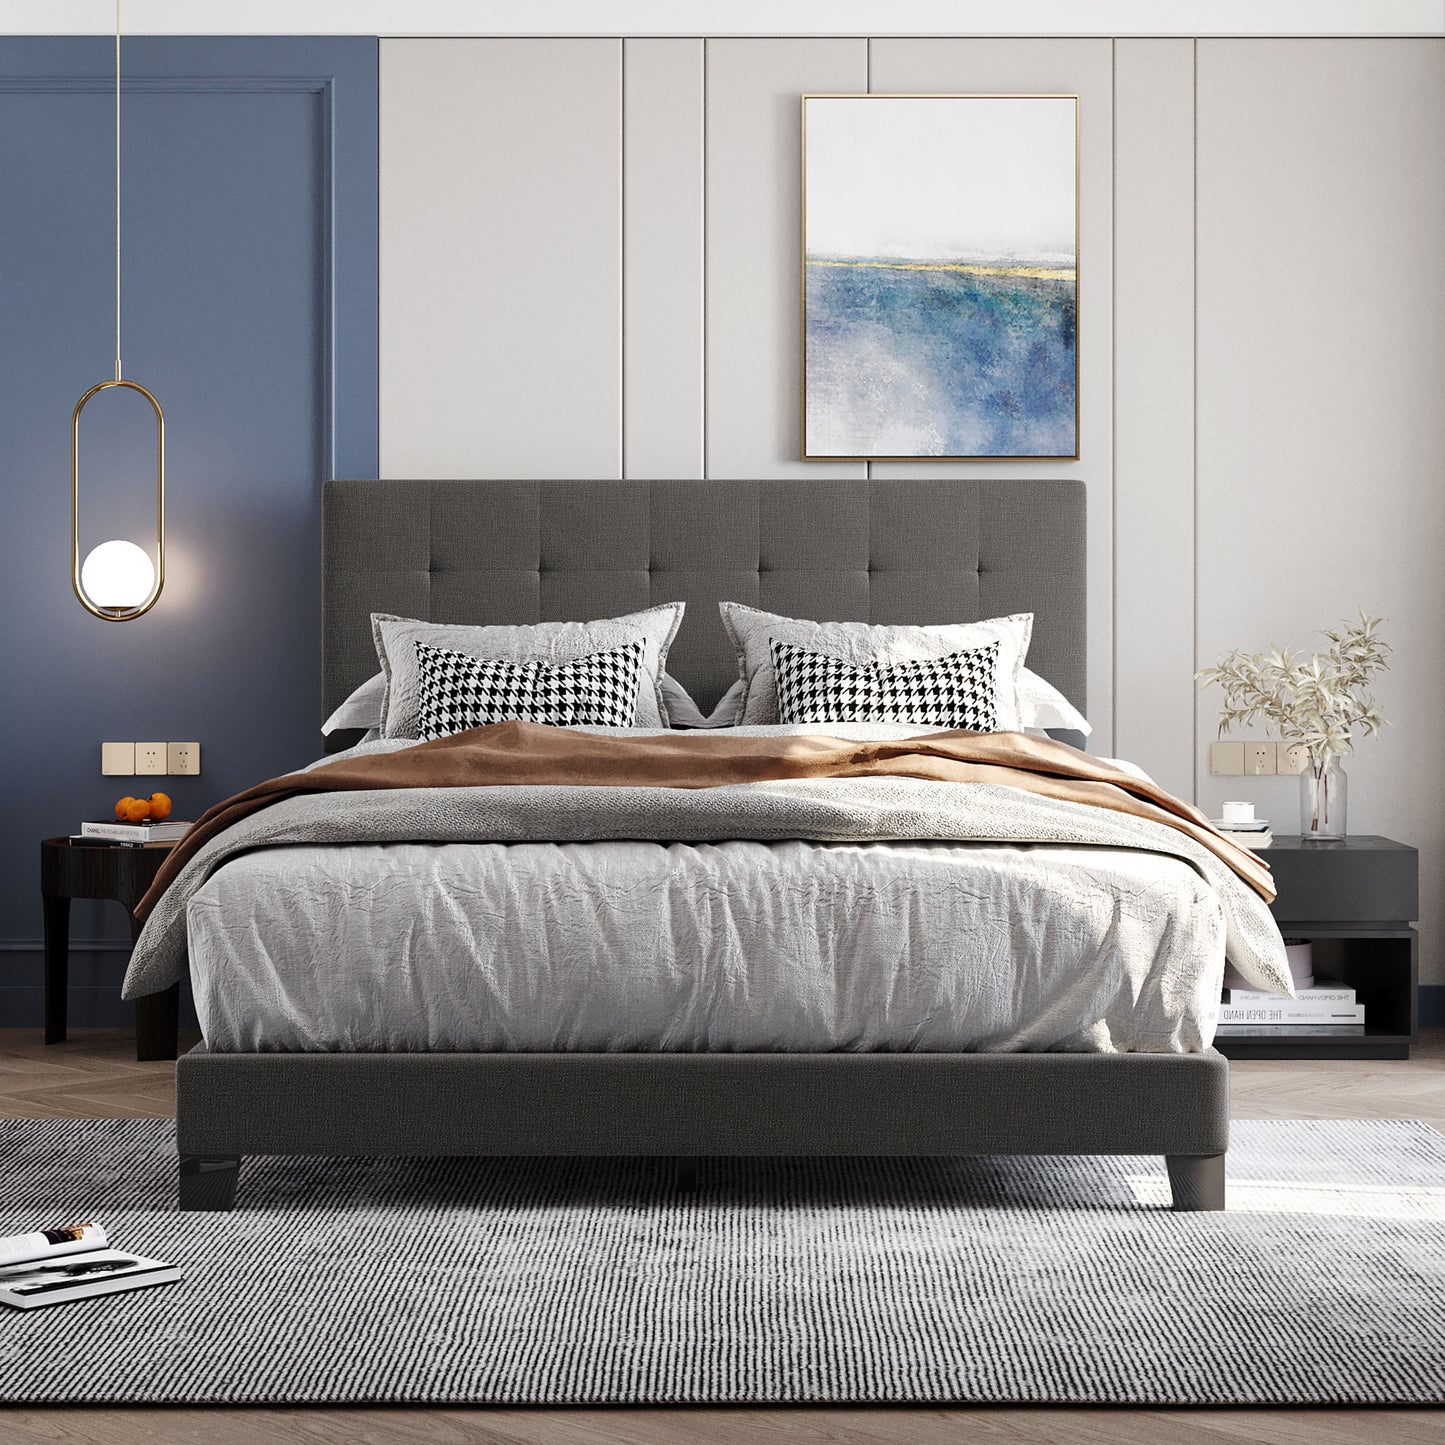 Upholstered Platform Bed with Tufted Headboard, Box Spring Needed, Gray Linen Fabric, Queen Size